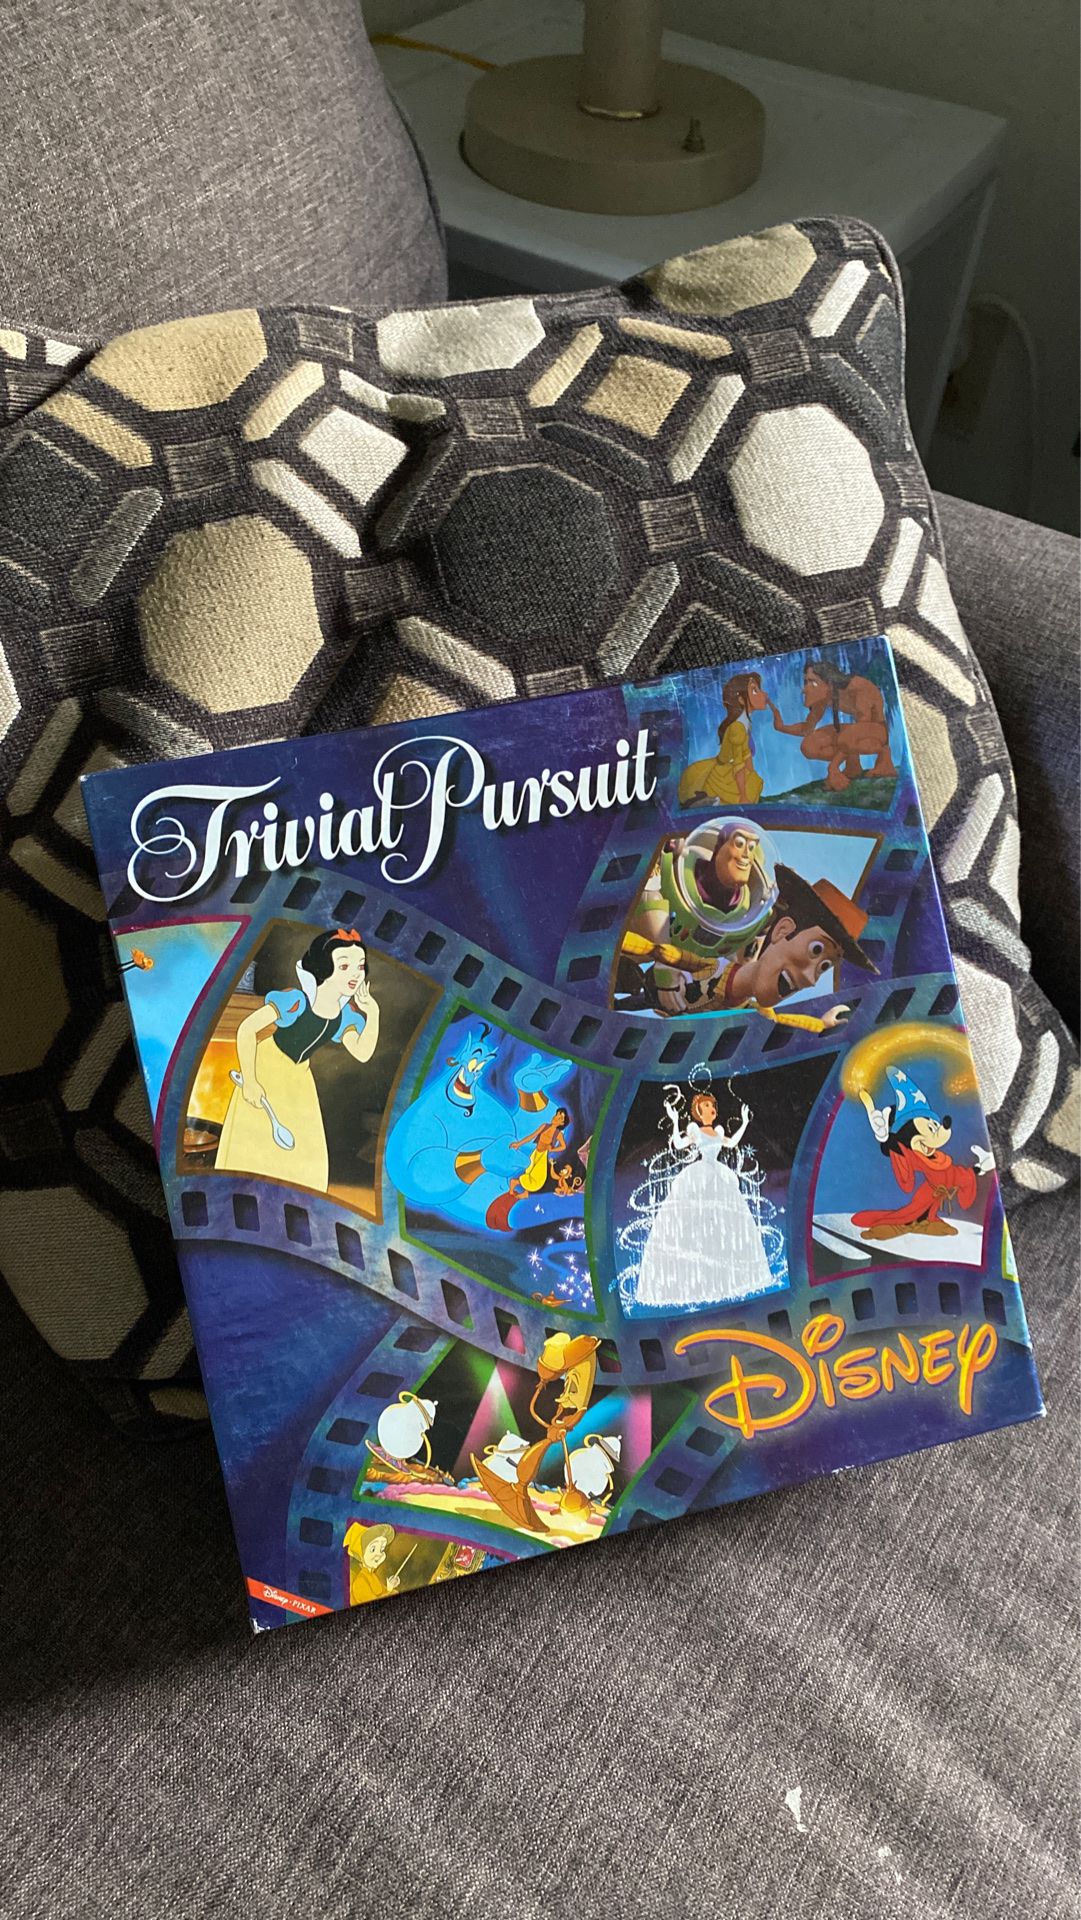 Trivial Pursuit Disney The Animated Picture Edition